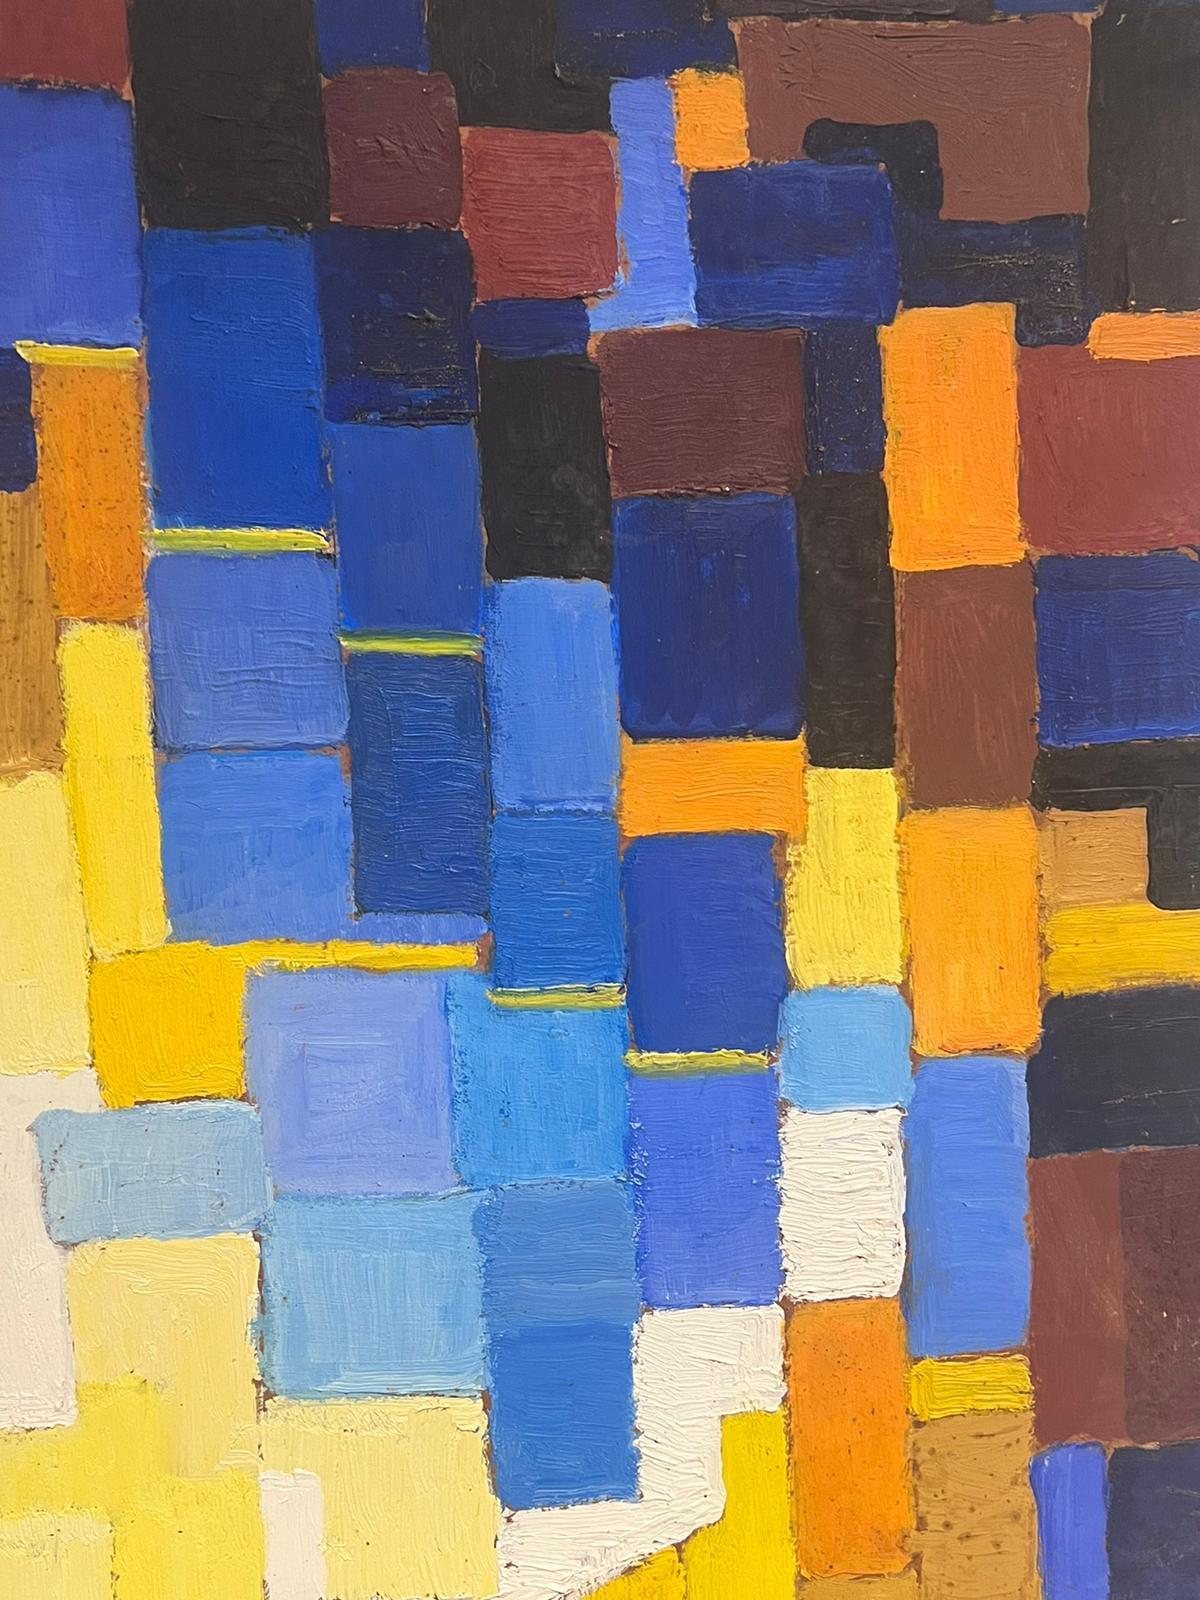 20th Century French Cubist Oil Painting Blues Oranges Yellow & Beige Cubes For Sale 1